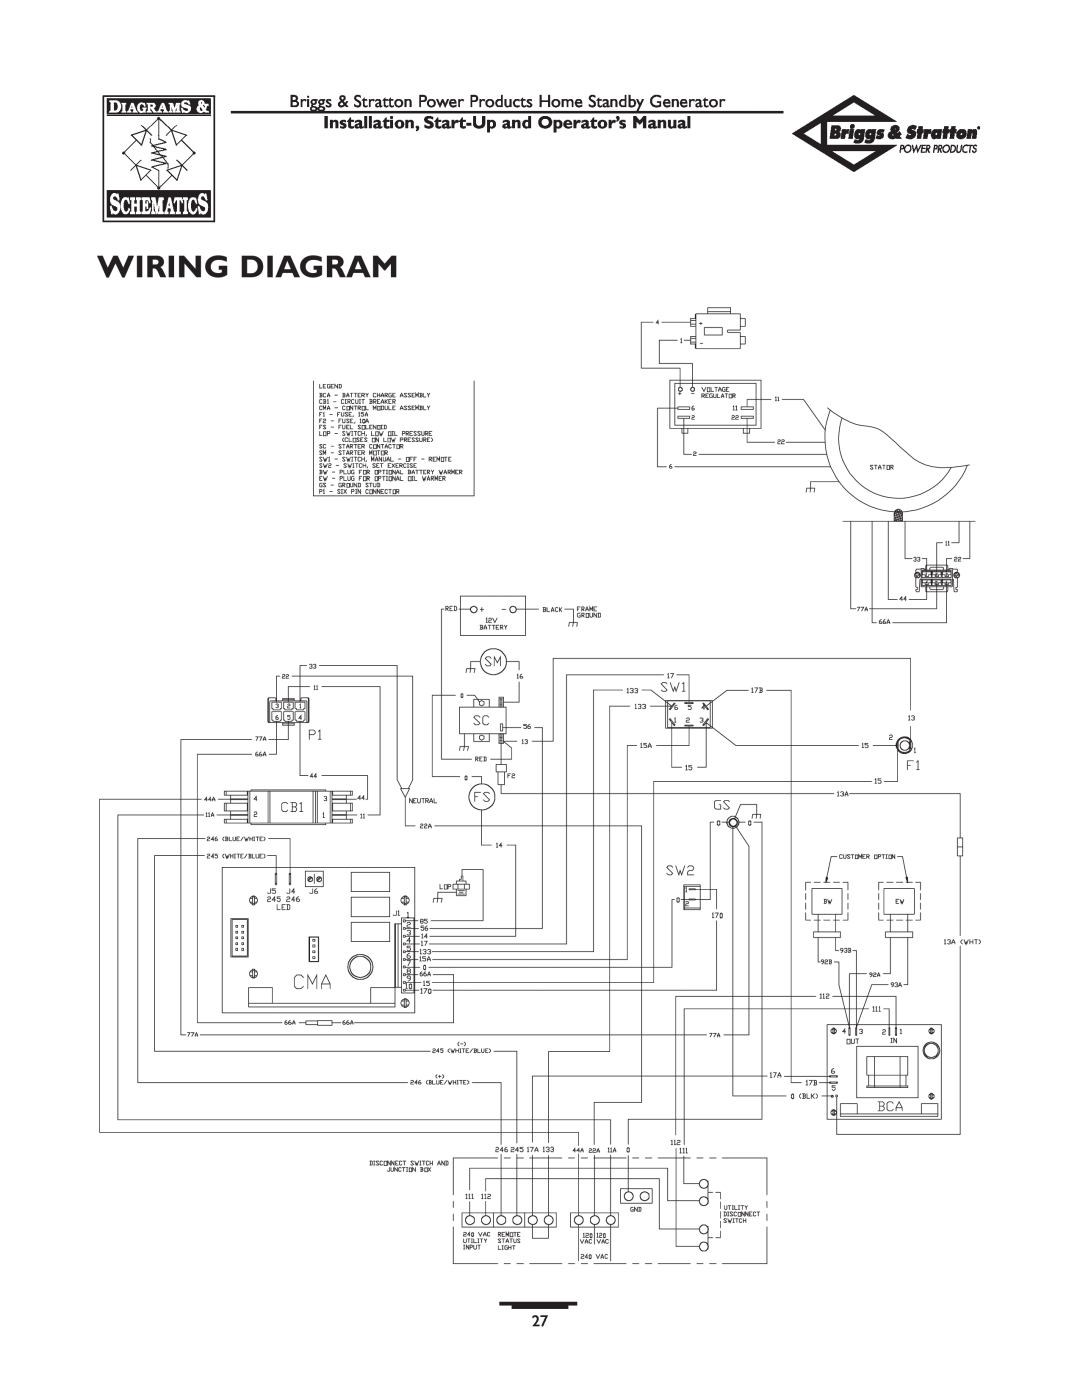 Briggs & Stratton 01897-0 manual Wiring Diagram, Installation, Start-Up and Operator’s Manual 